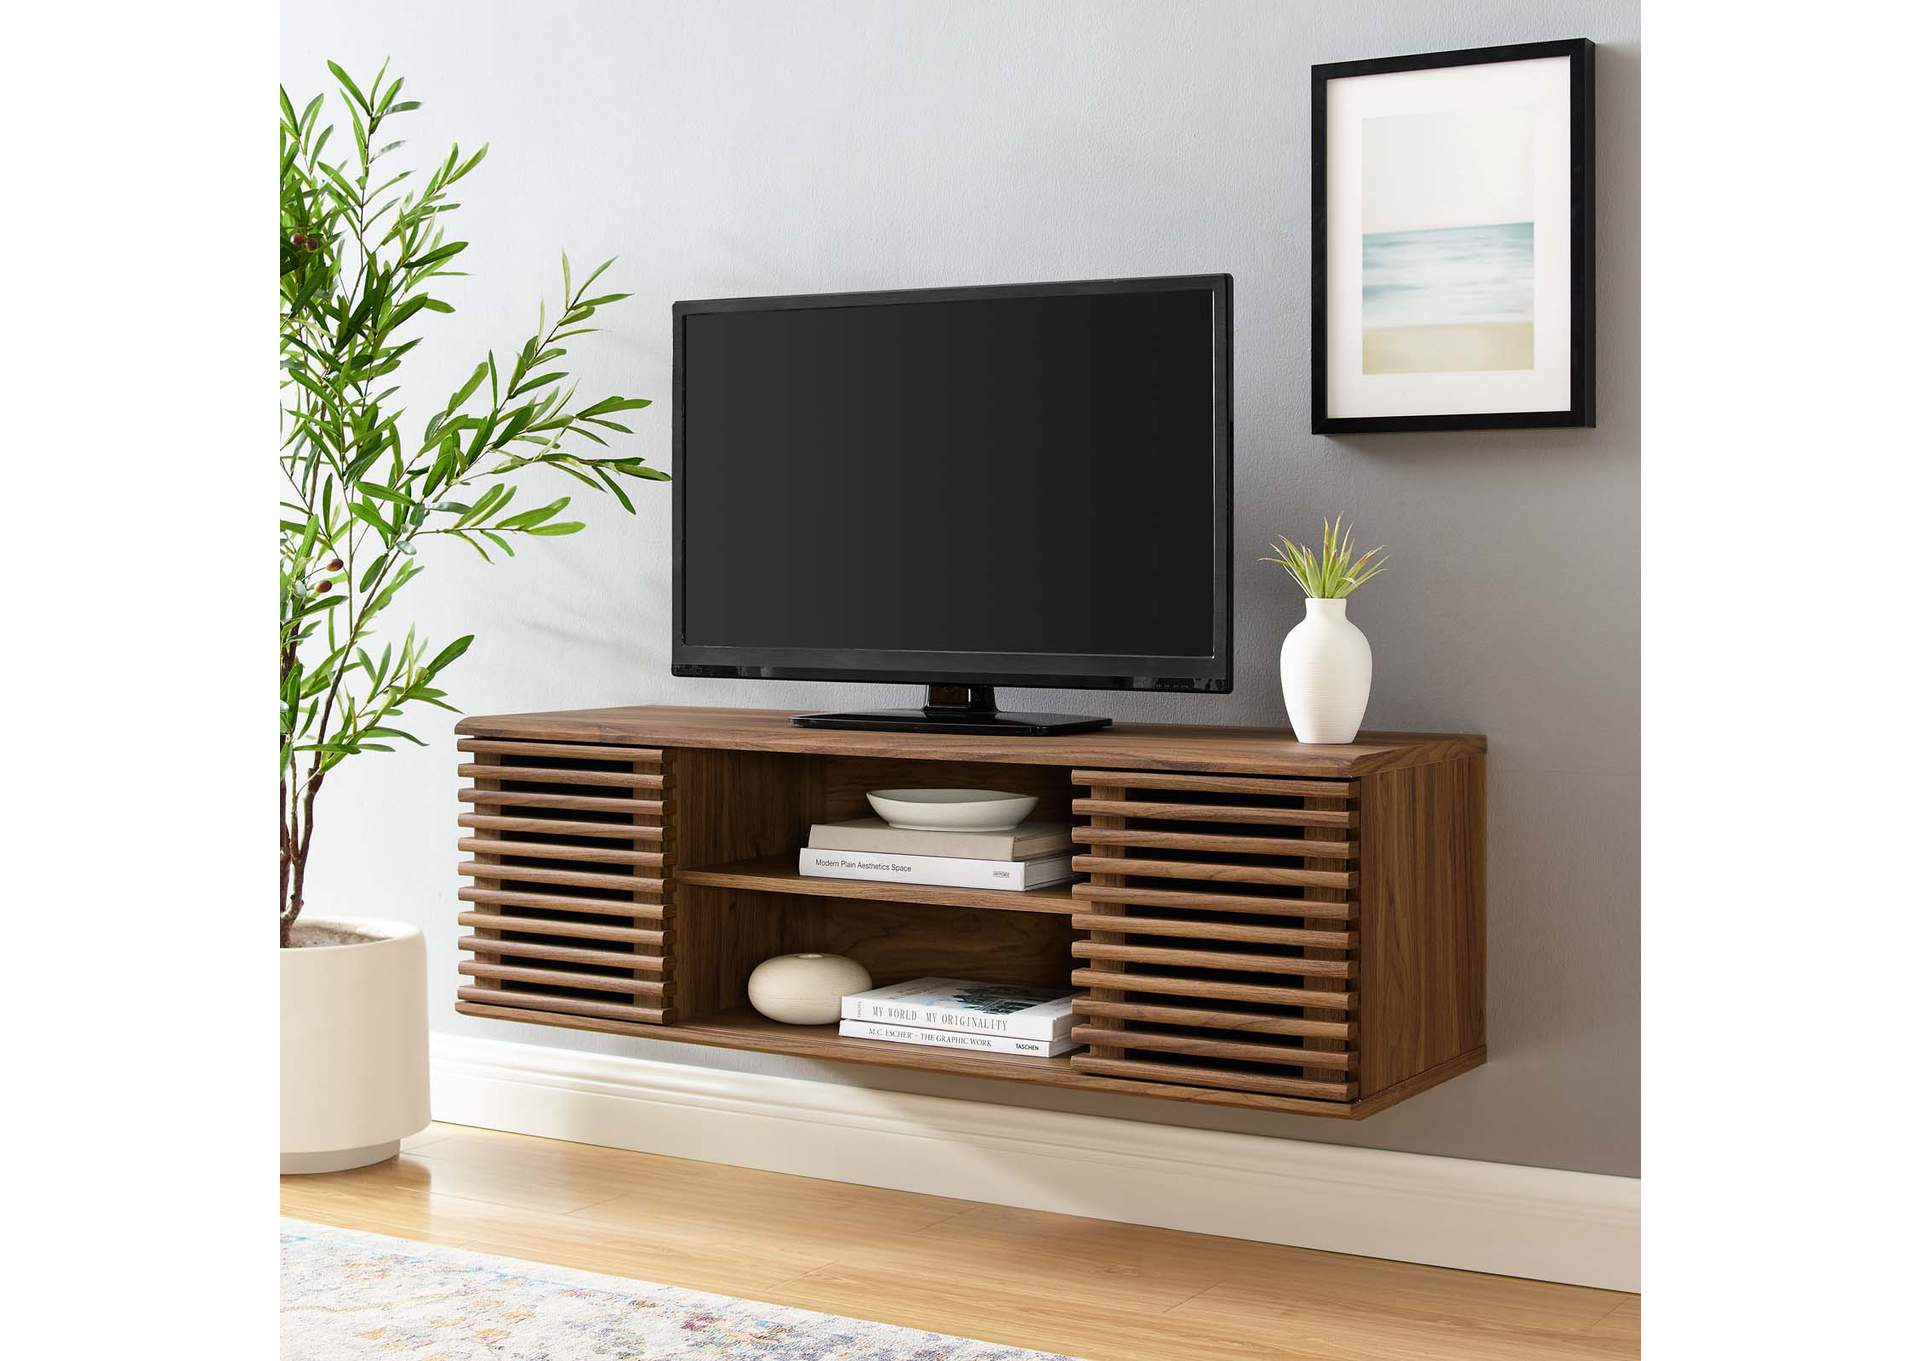 Walnut Render 46" Wall-Mount Media Console TV Stand,Modway